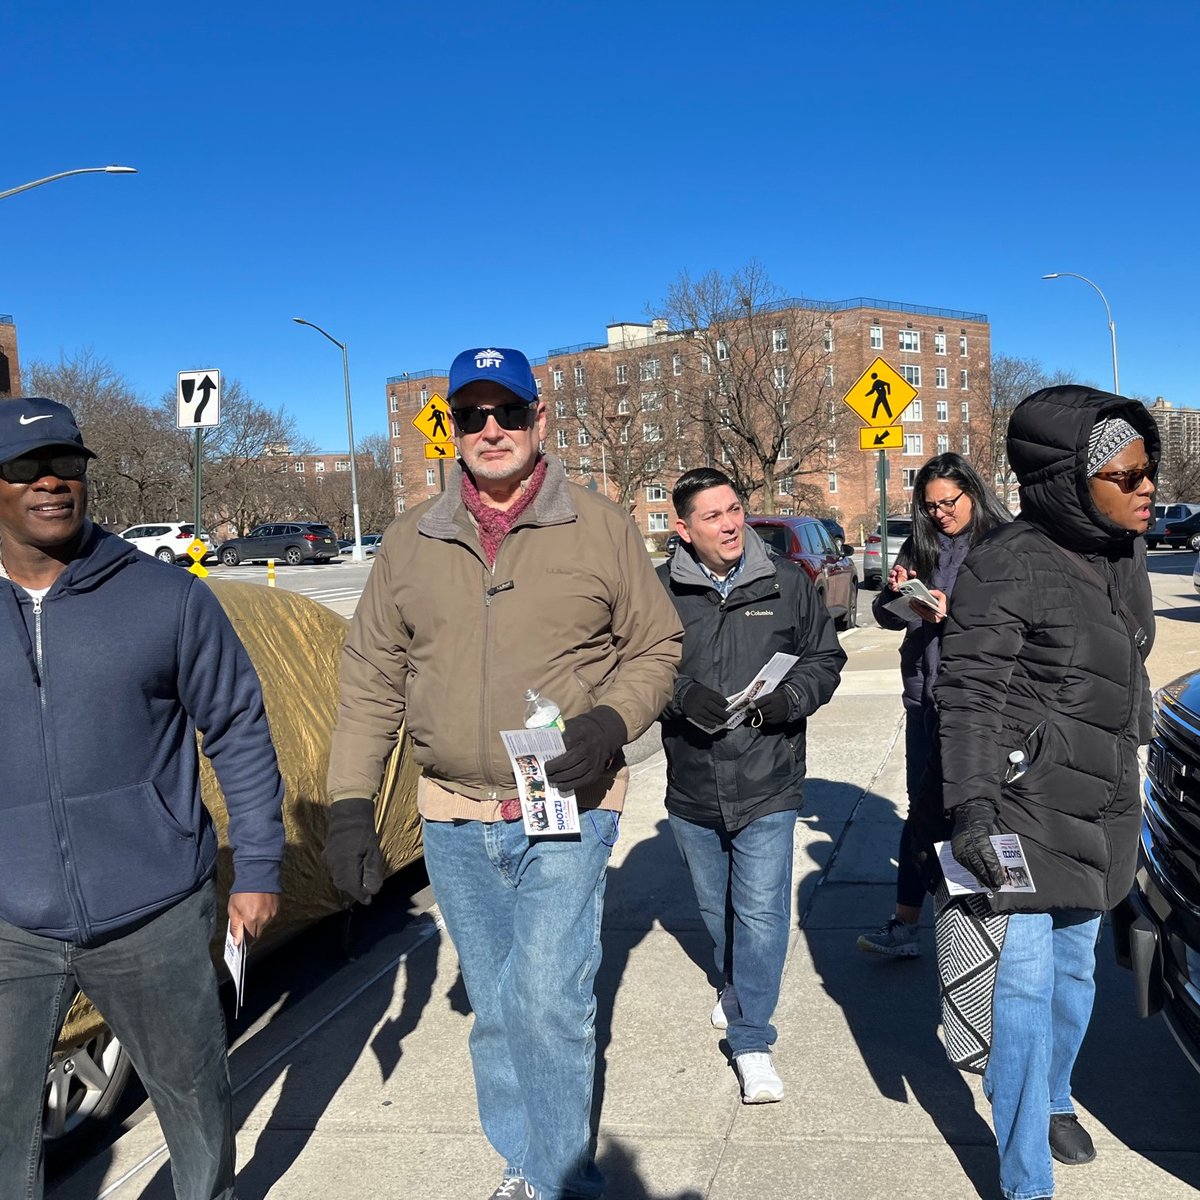 Check out all this democracy in action! UFT members, including VP for Education Mary Vaccaro, joined @rweingarten to rally and canvass in Bayside, Queens, to get out the vote for @Tom_Suozzi in the Feb. 13 special election in New York's 3rd Congressional District.